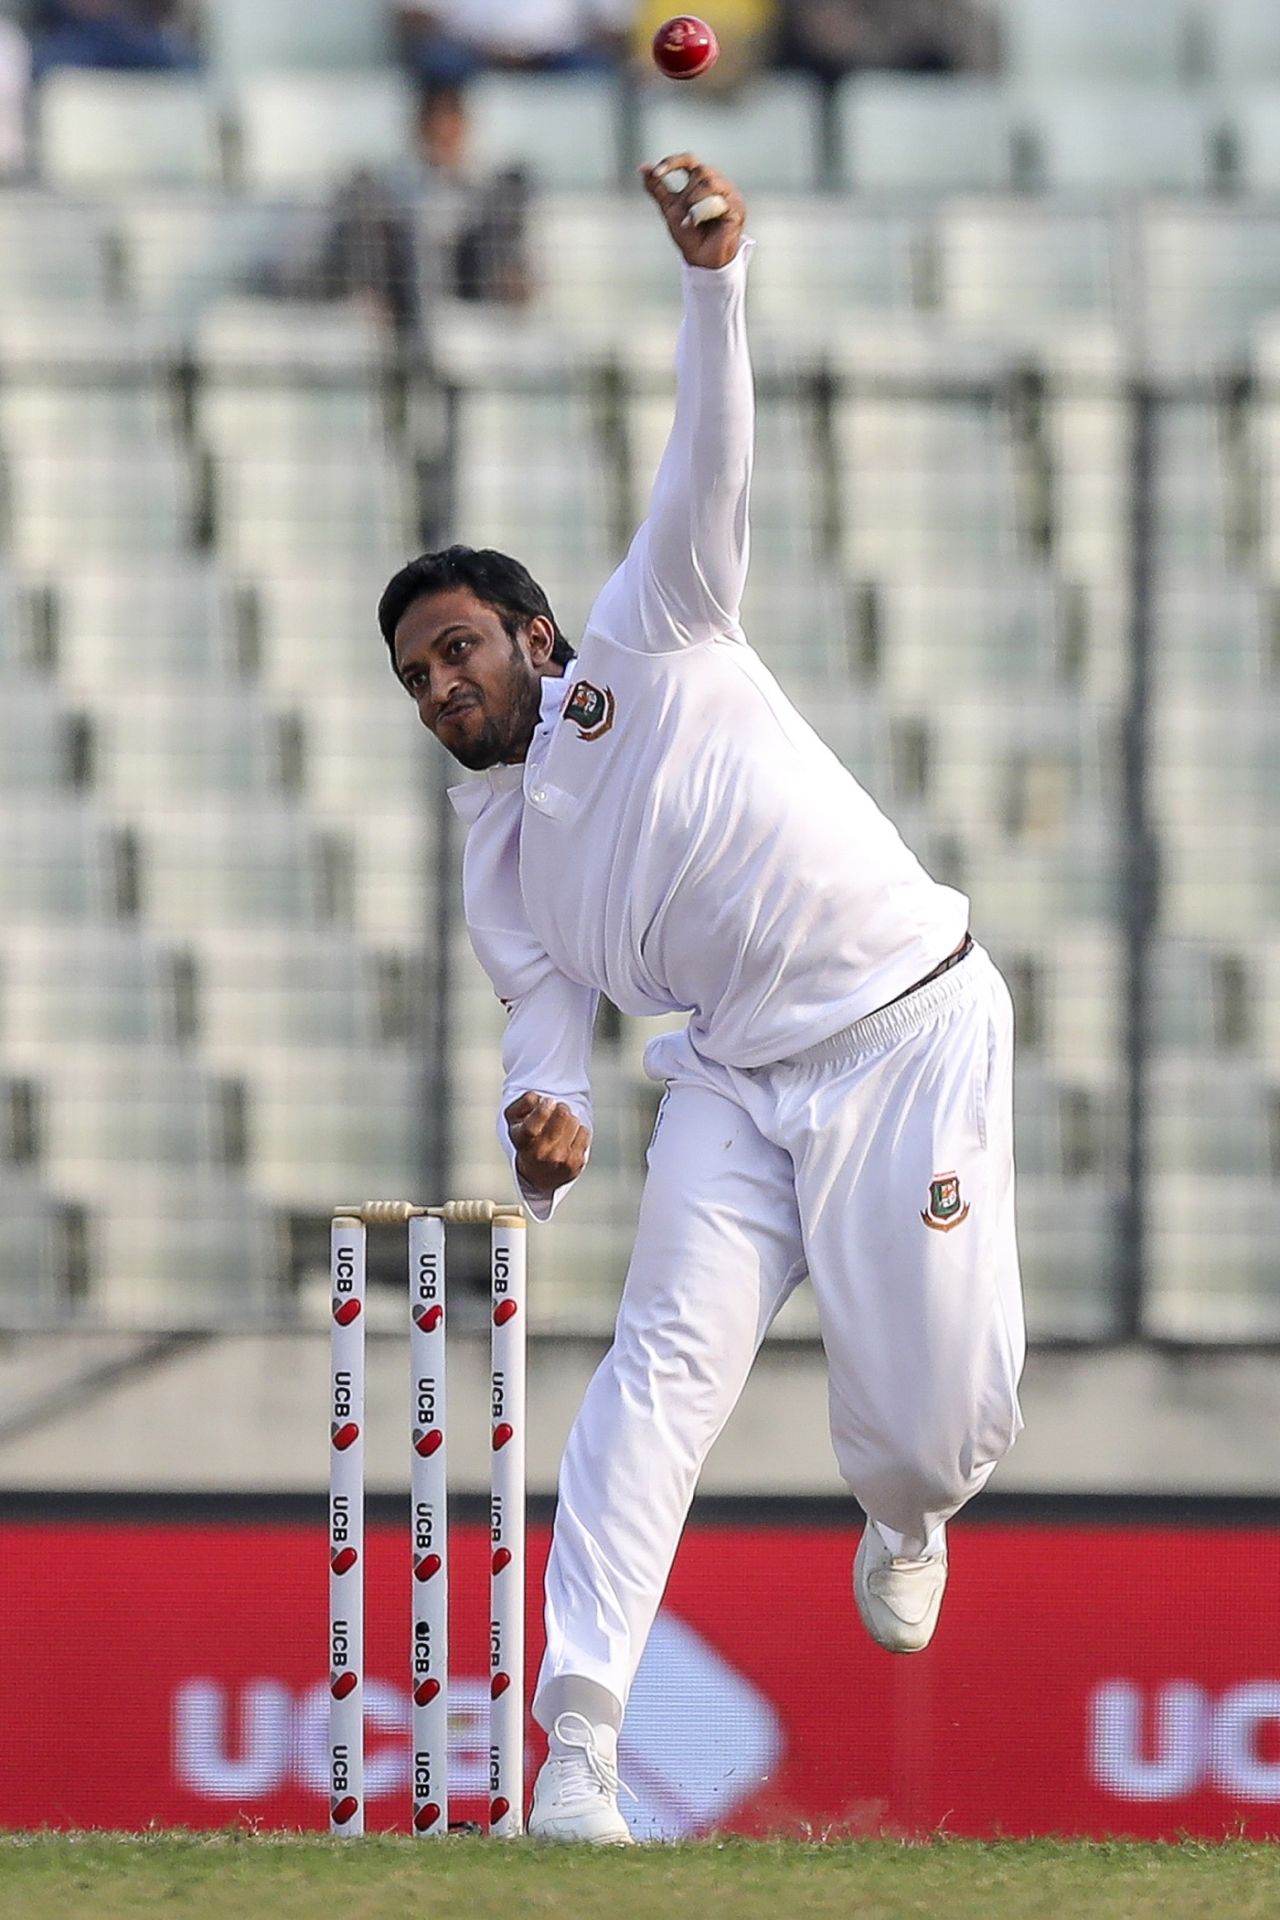 Shakib Al Hasan struck in his first over, Bangladesh v West Indies, 2nd Test, Mirpur, 2nd day, December 1, 2018